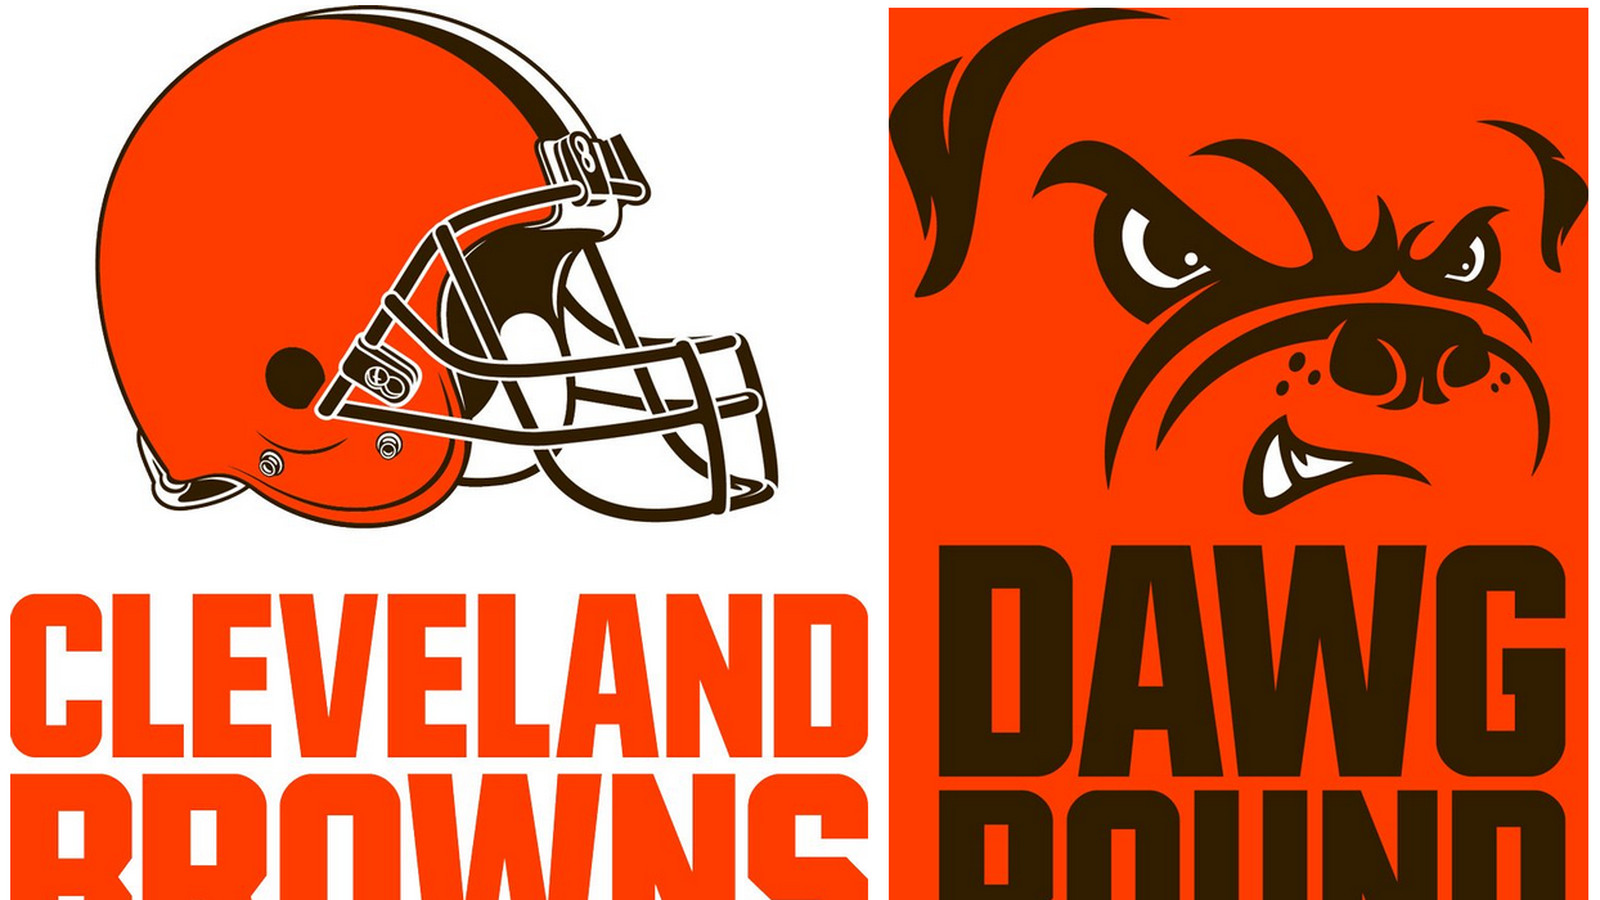 Cleveland Browns New Logos Include an Updated Helmet & Dawg Pound Branding By Nature